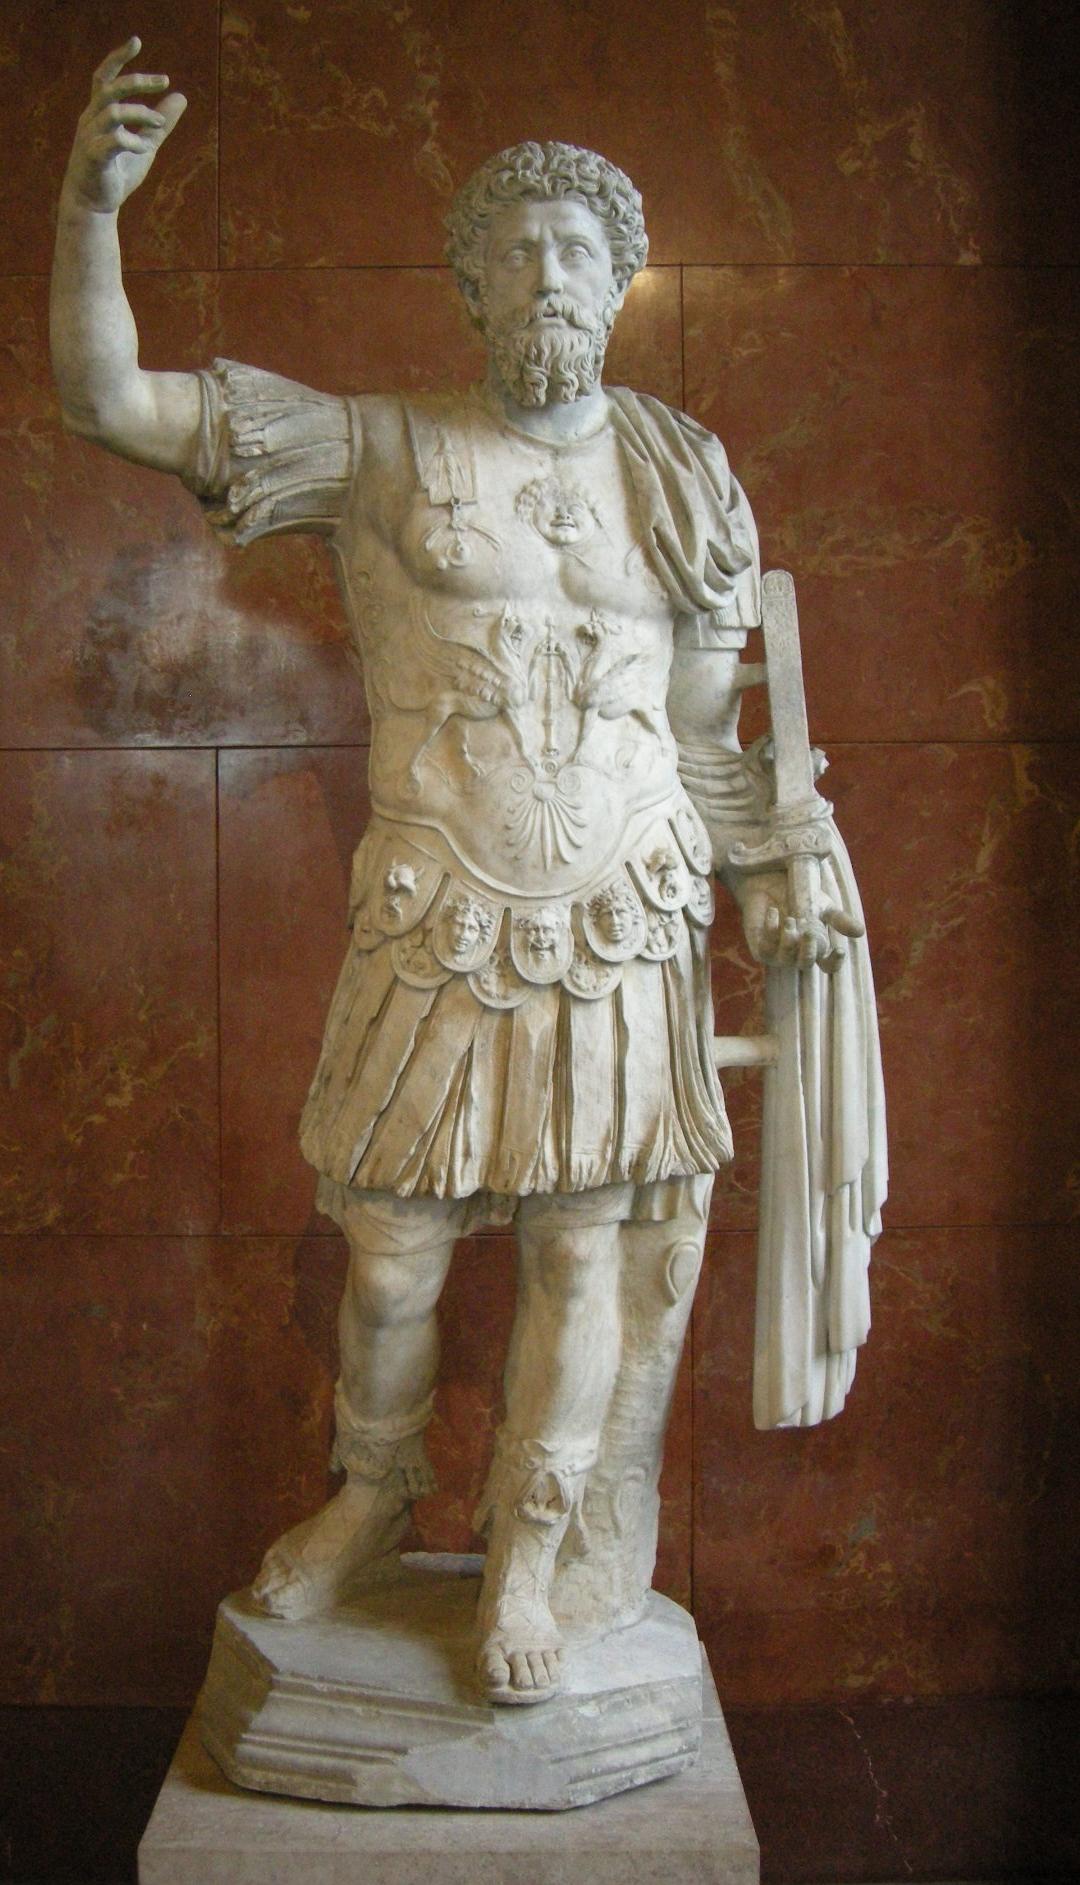 Marcus Aurelius wrote a handbook on building character. A late second-century statue of Marcus Aurelius, originally from Gabii (Italy), now in the Louvre. (Sailko/CC BY 2.5)